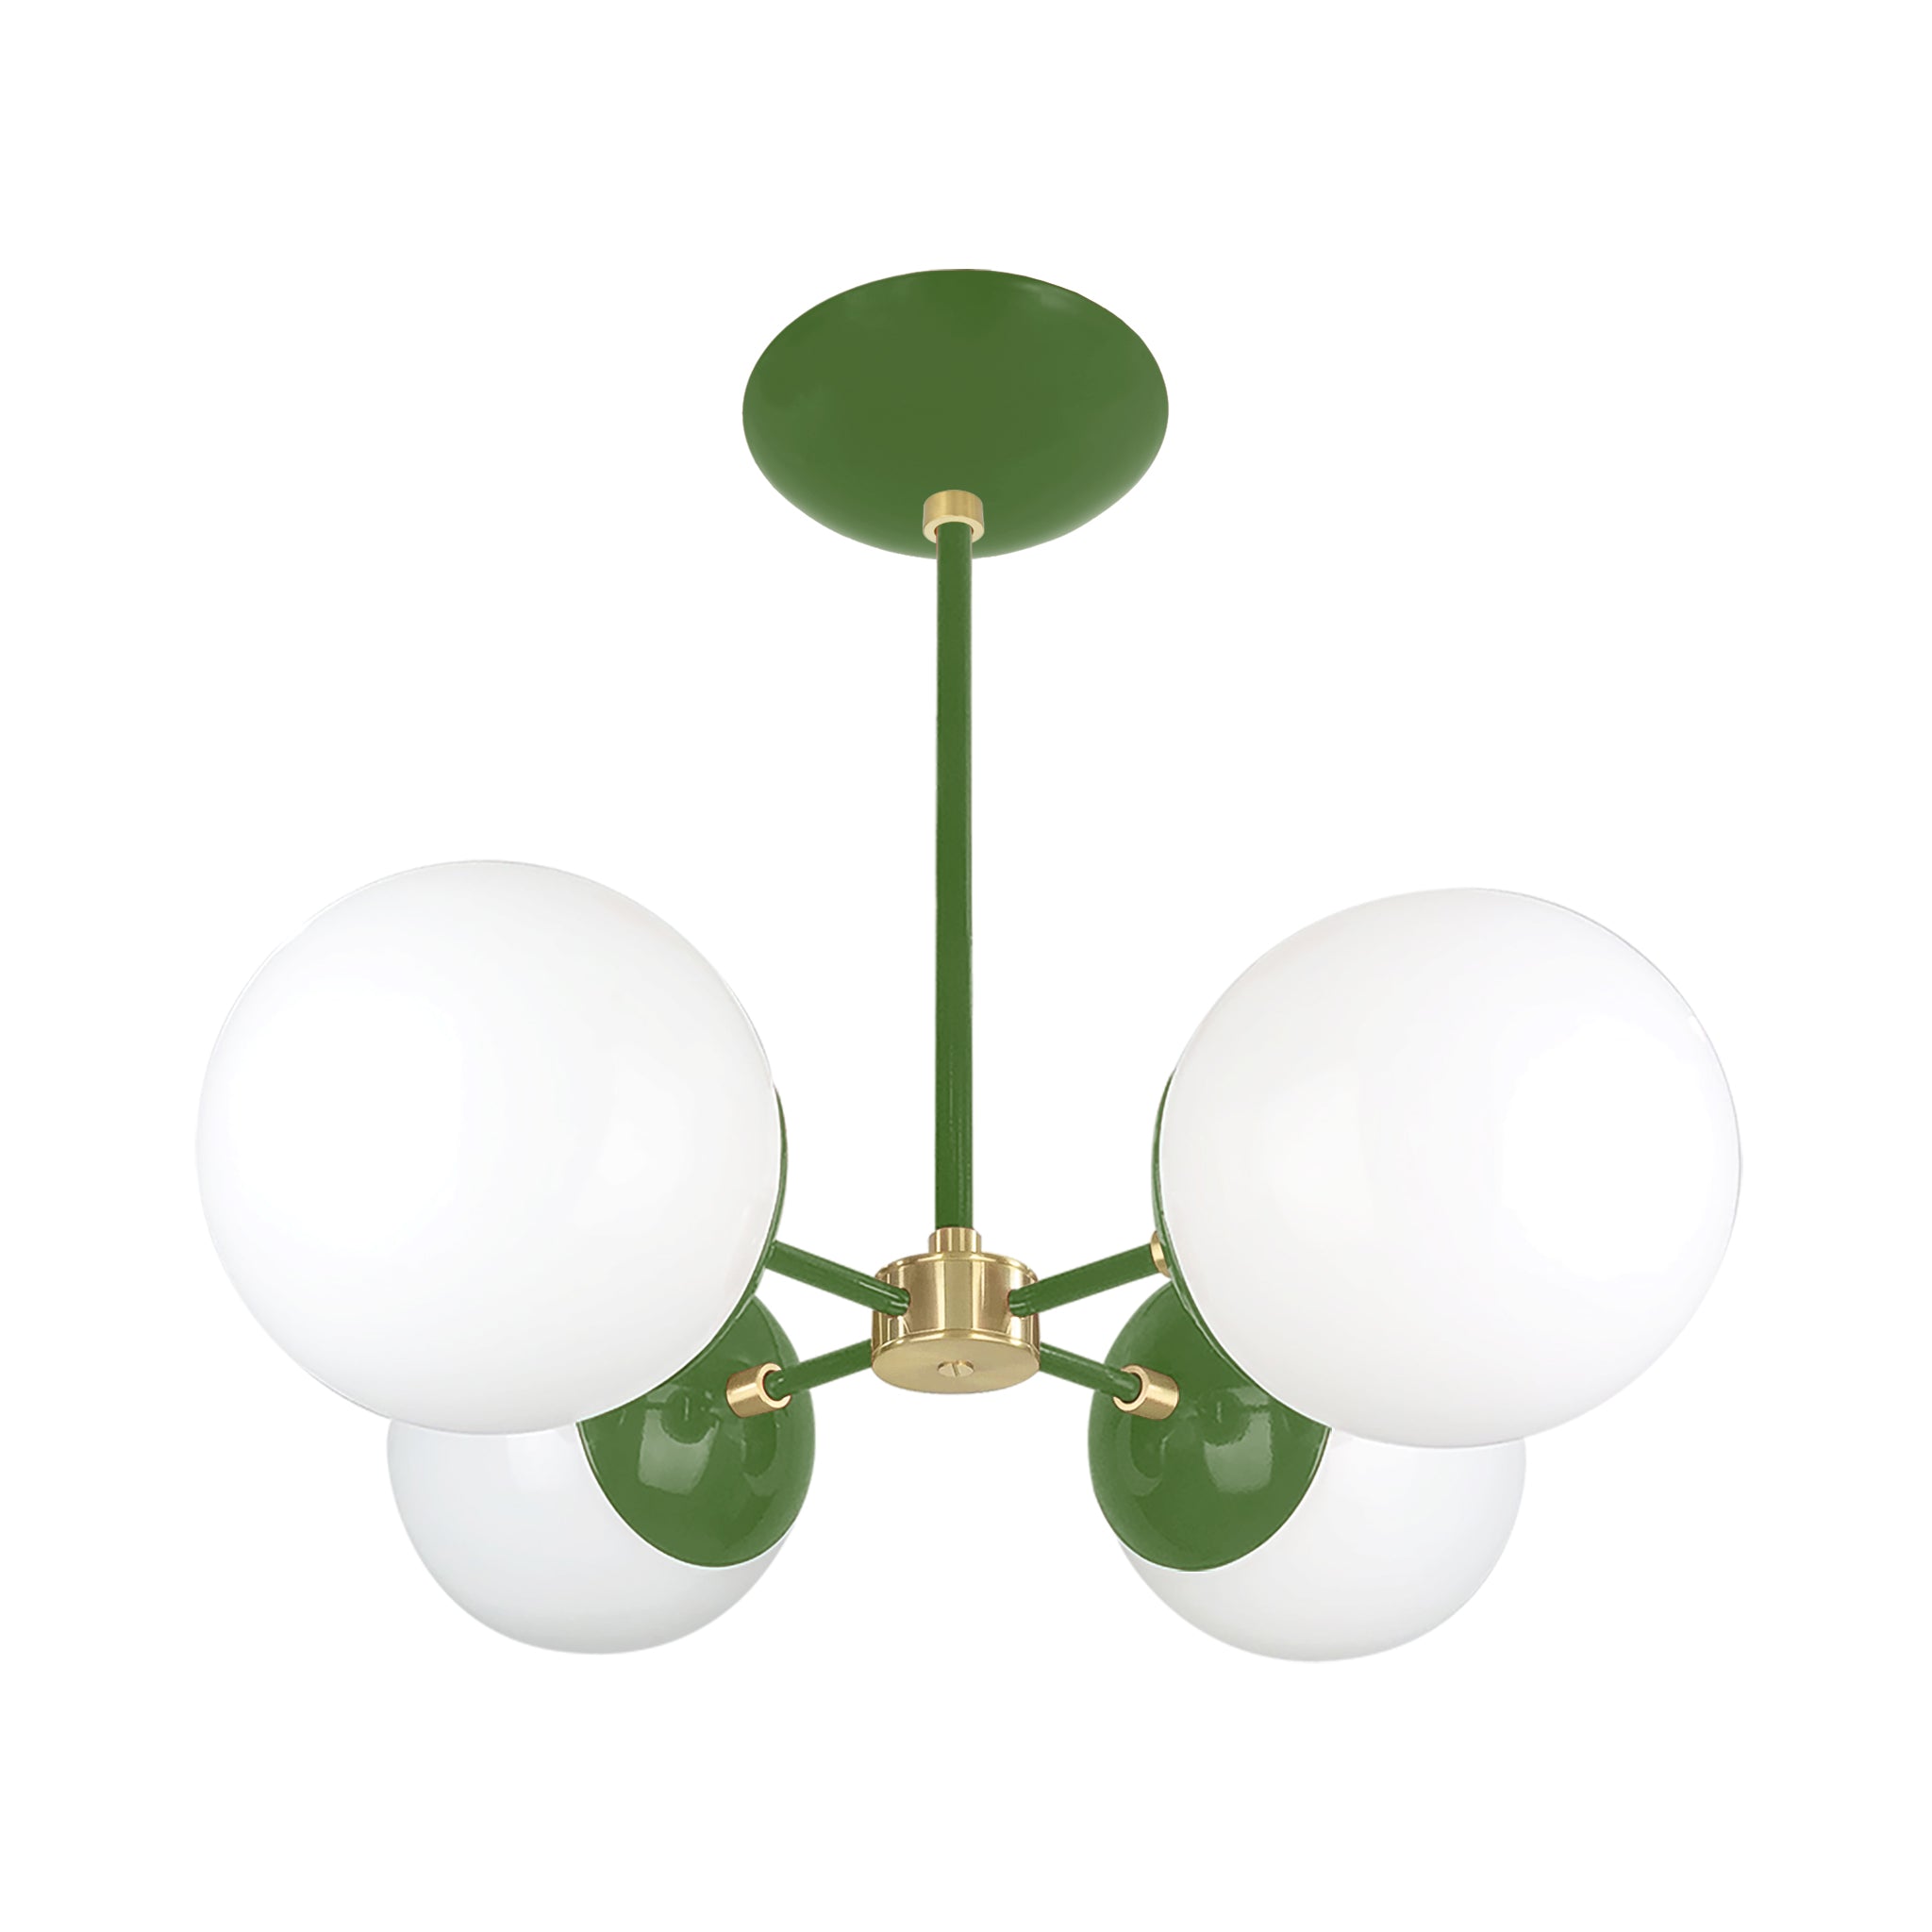 Brass and python green color Orbi chandelier Dutton Brown lighting